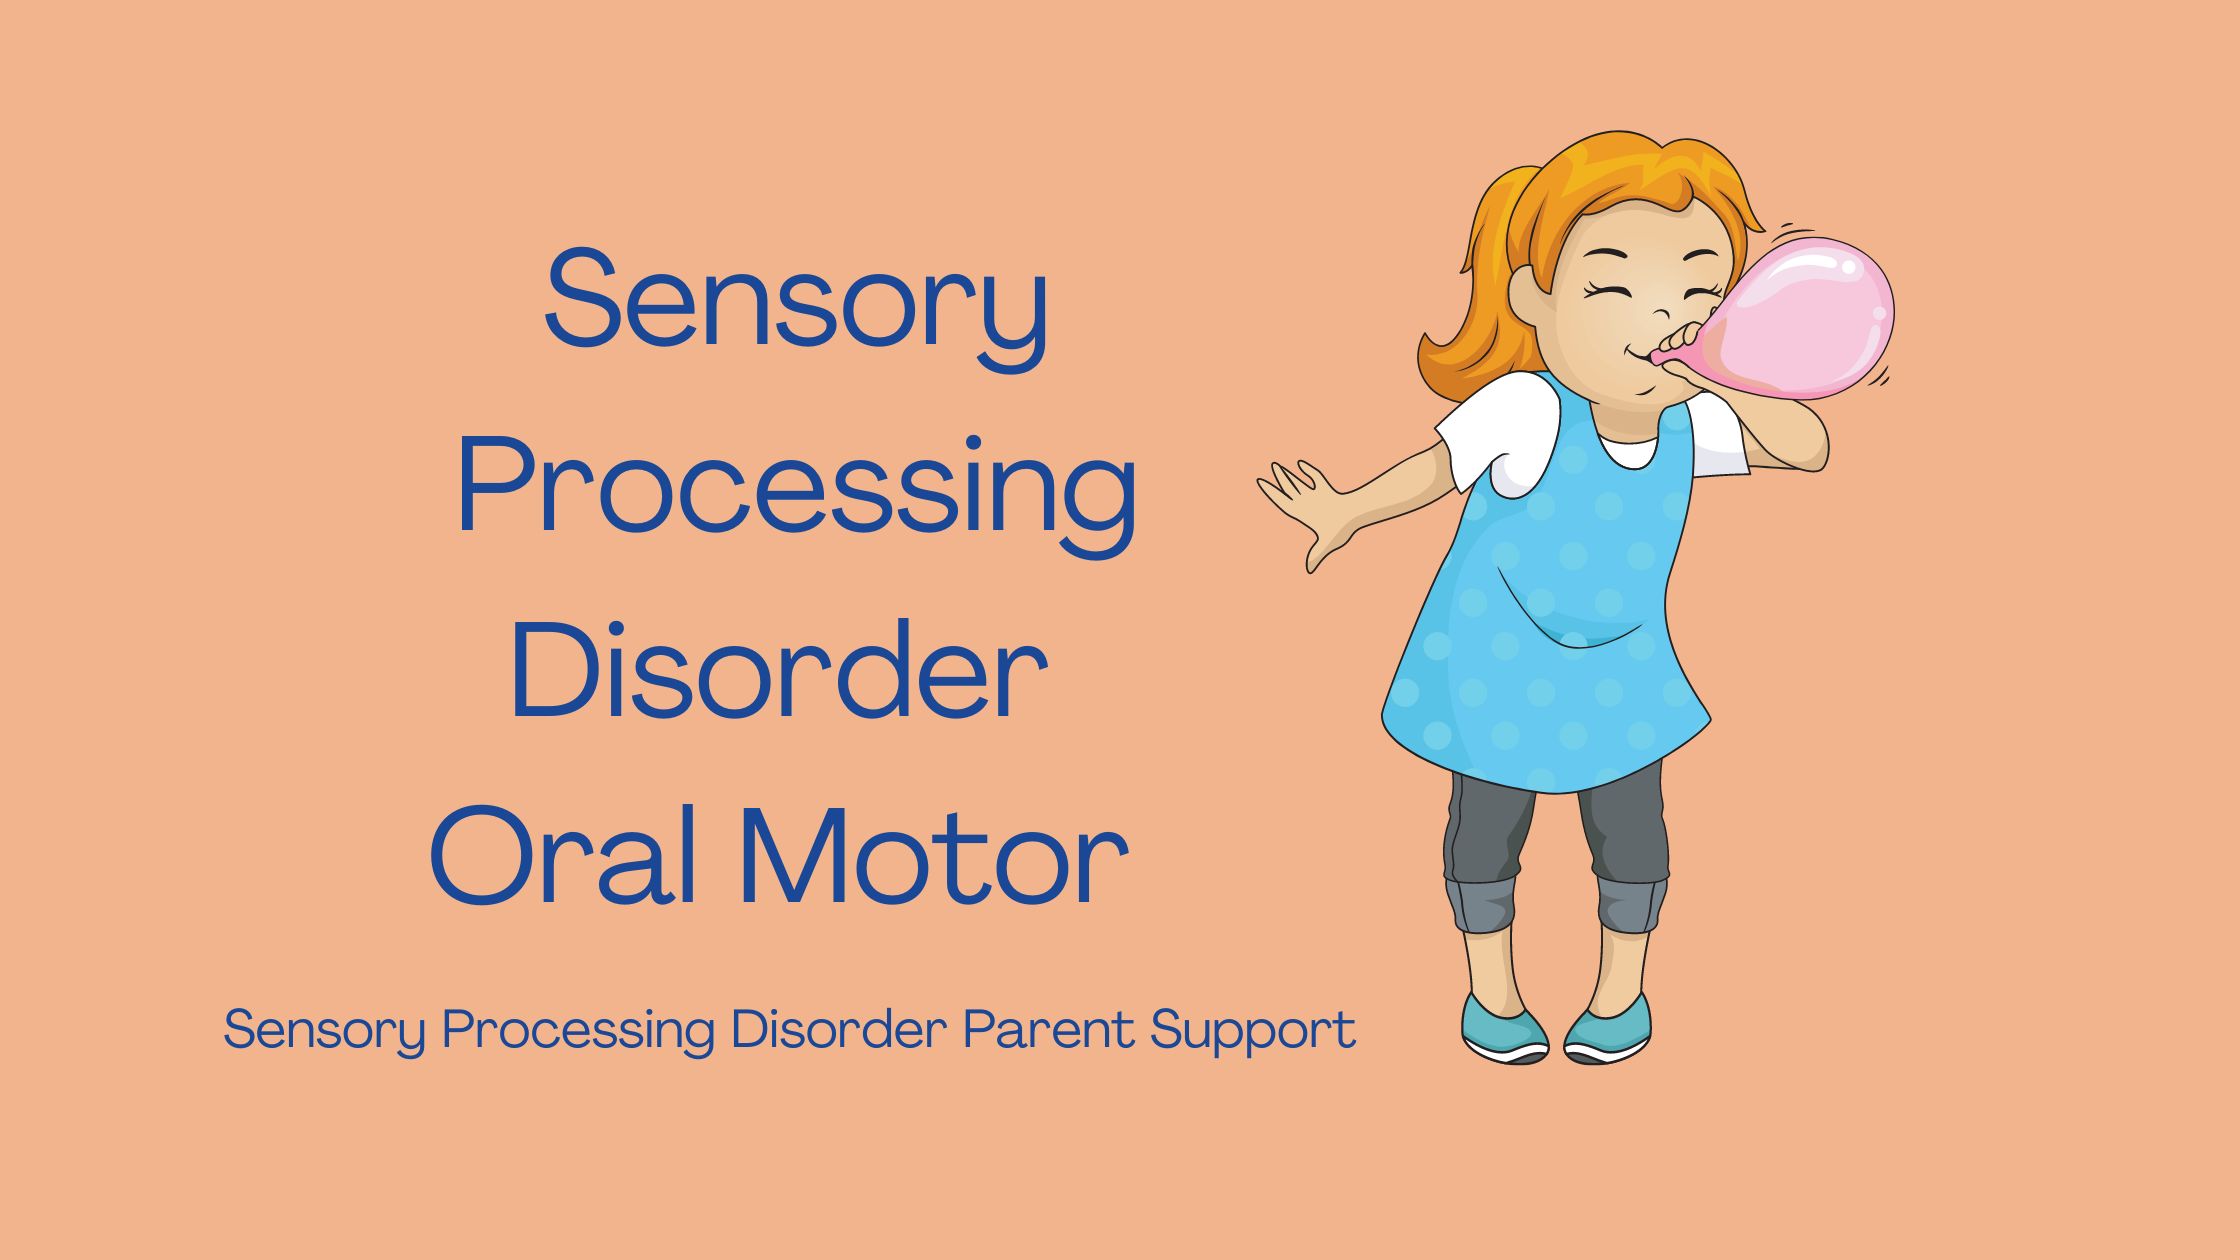 child with sensory processing disorder doing oral motor activity blowing up a balloon  Sensory Processing Disorder Oral Motor